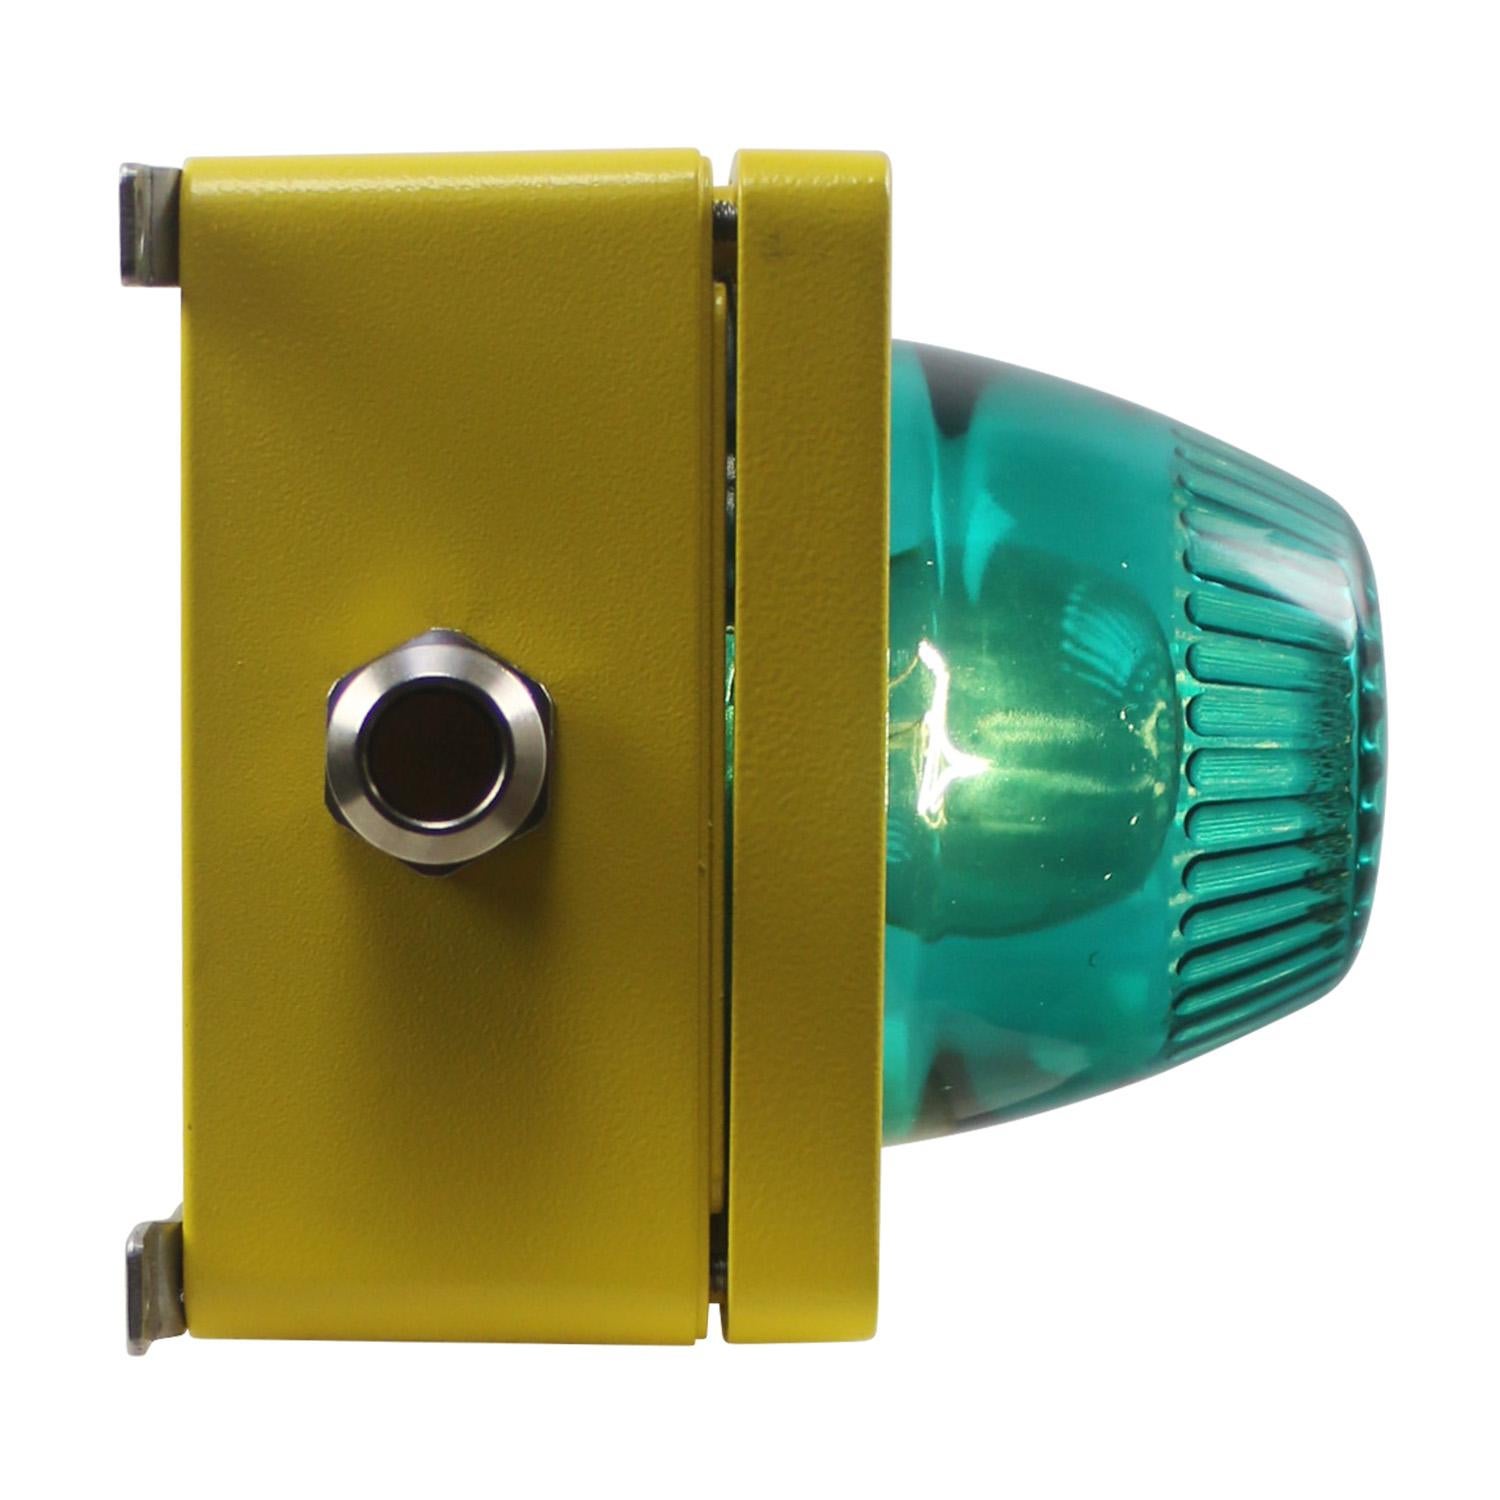 Airport wall / ceiling lamp
Cast aluminum, striped green glass.

Weight: 3.10 kg / 6.8 lb

Priced per individual item. All lamps have been made suitable by international standards for incandescent light bulbs, energy-efficient and LED bulbs. E26/E27